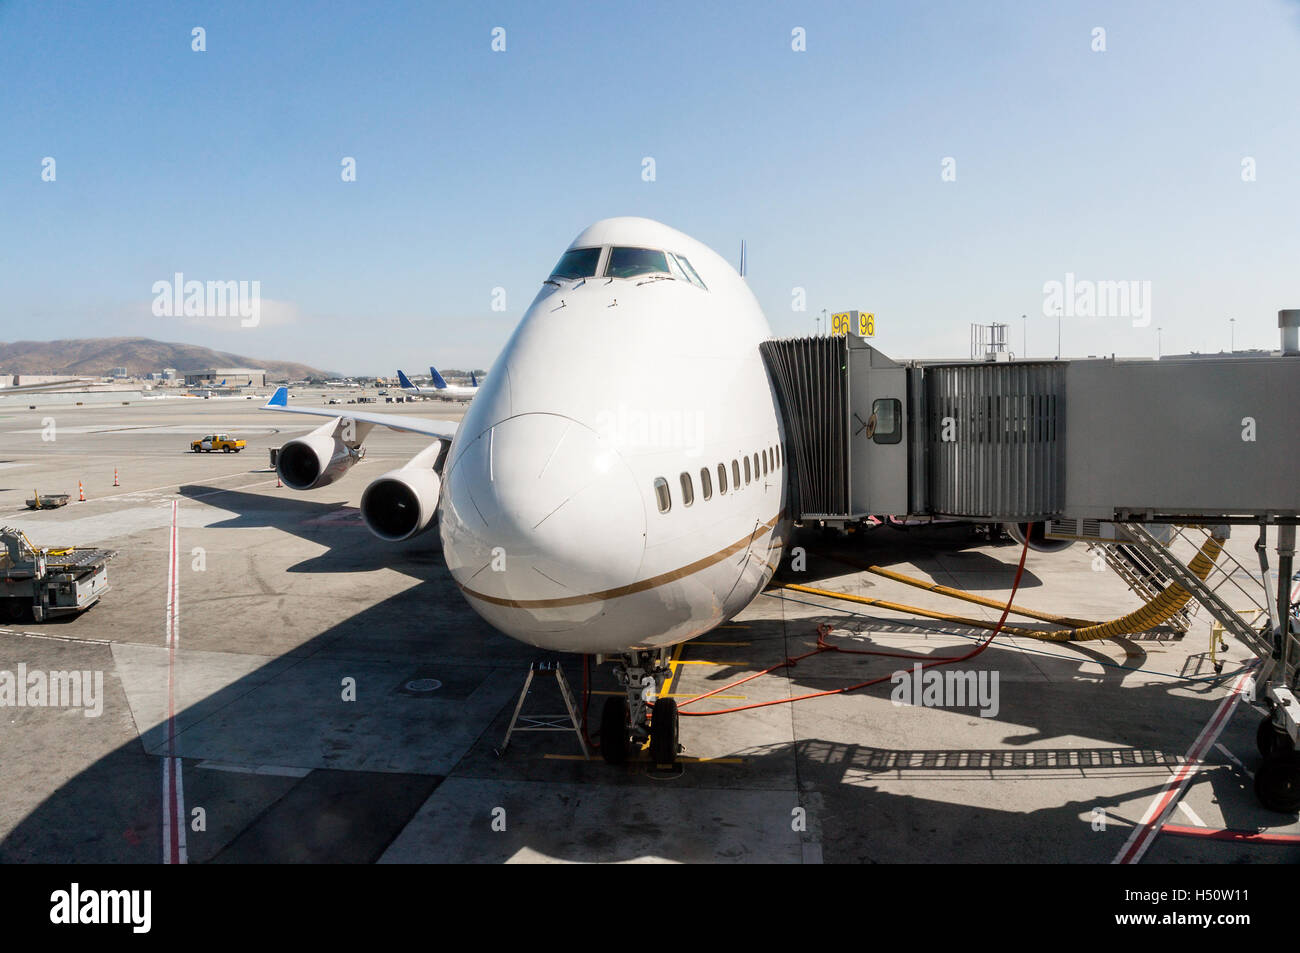 Focus on the nose of a passenger aircraft that is parked at airport gate and connected to a jet bridge. Stock Photo